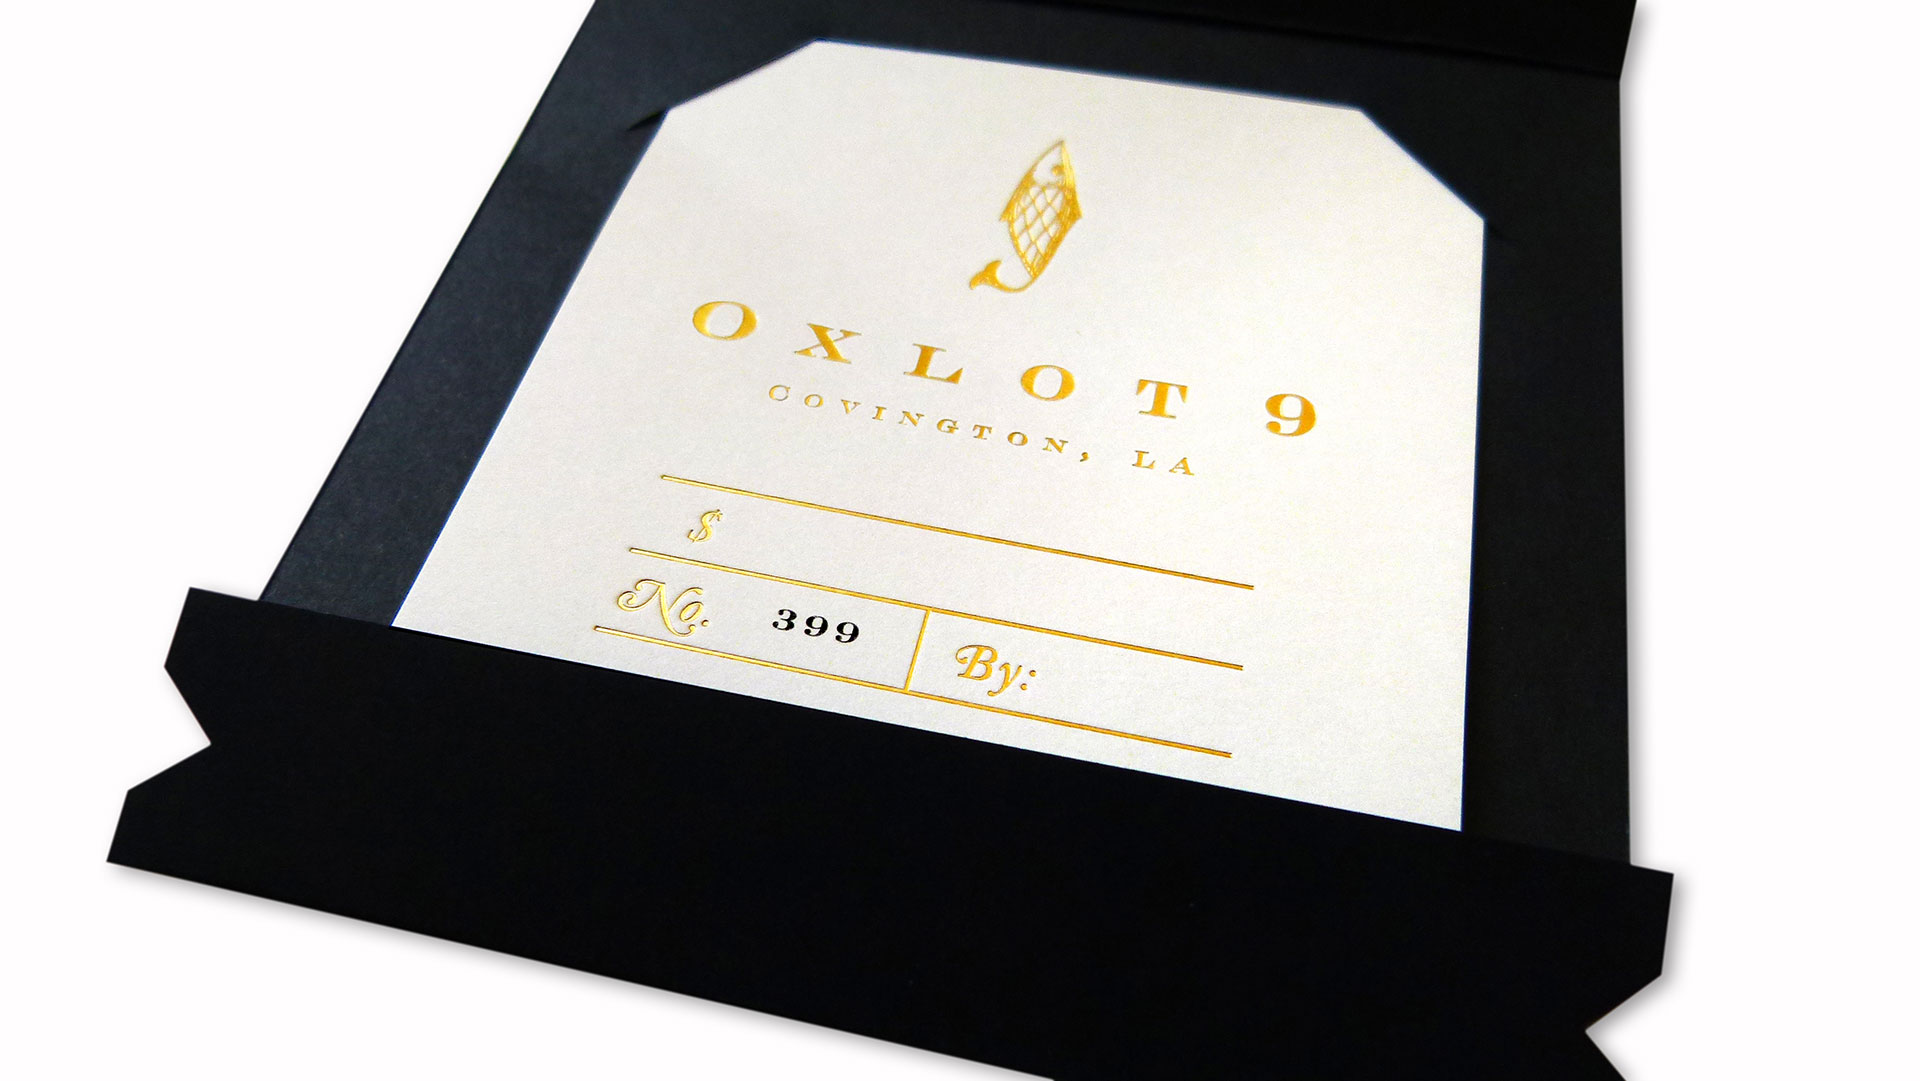 Oxlot 9 Gift Card - PaperSpecs